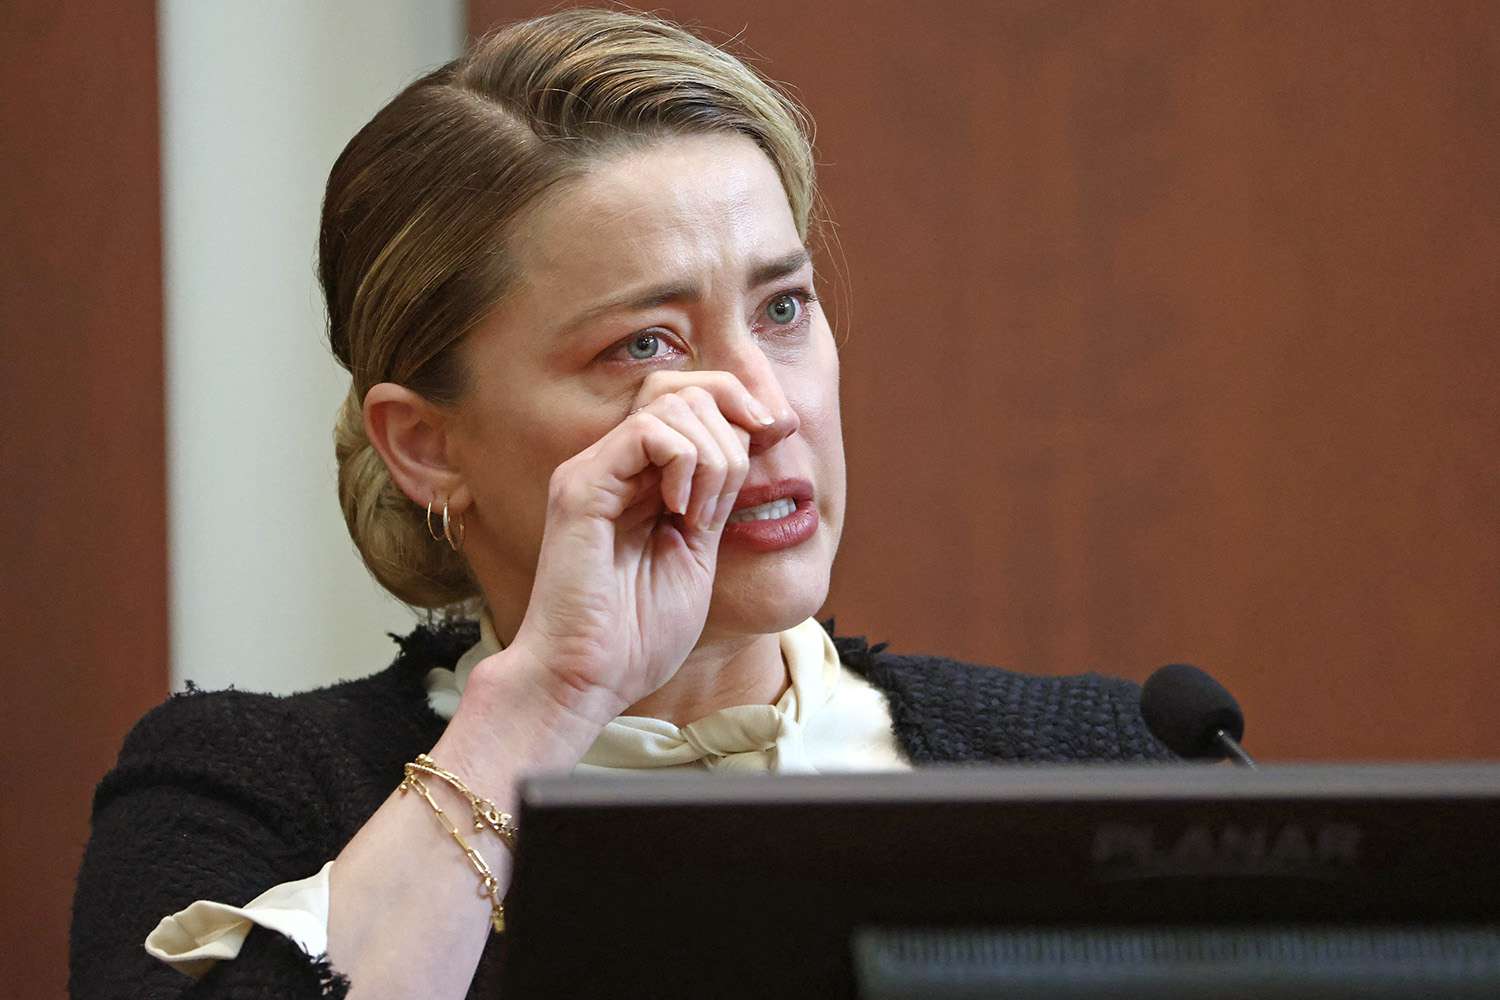 US actress Amber Heard testifies at the Fairfax County Circuit Courthouse in Fairfax, Virginia, on May 5, 2022. - Actor Johnny Depp is suing ex-wife Amber Heard for libel after she wrote an op-ed piece in The Washington Post in 2018 referring to herself as a public figure representing domestic abuse. (Photo by JIM LO SCALZO / POOL / POOL / AFP) (Photo by JIM LO SCALZO / POOL/POOL/AFP via Getty Images)